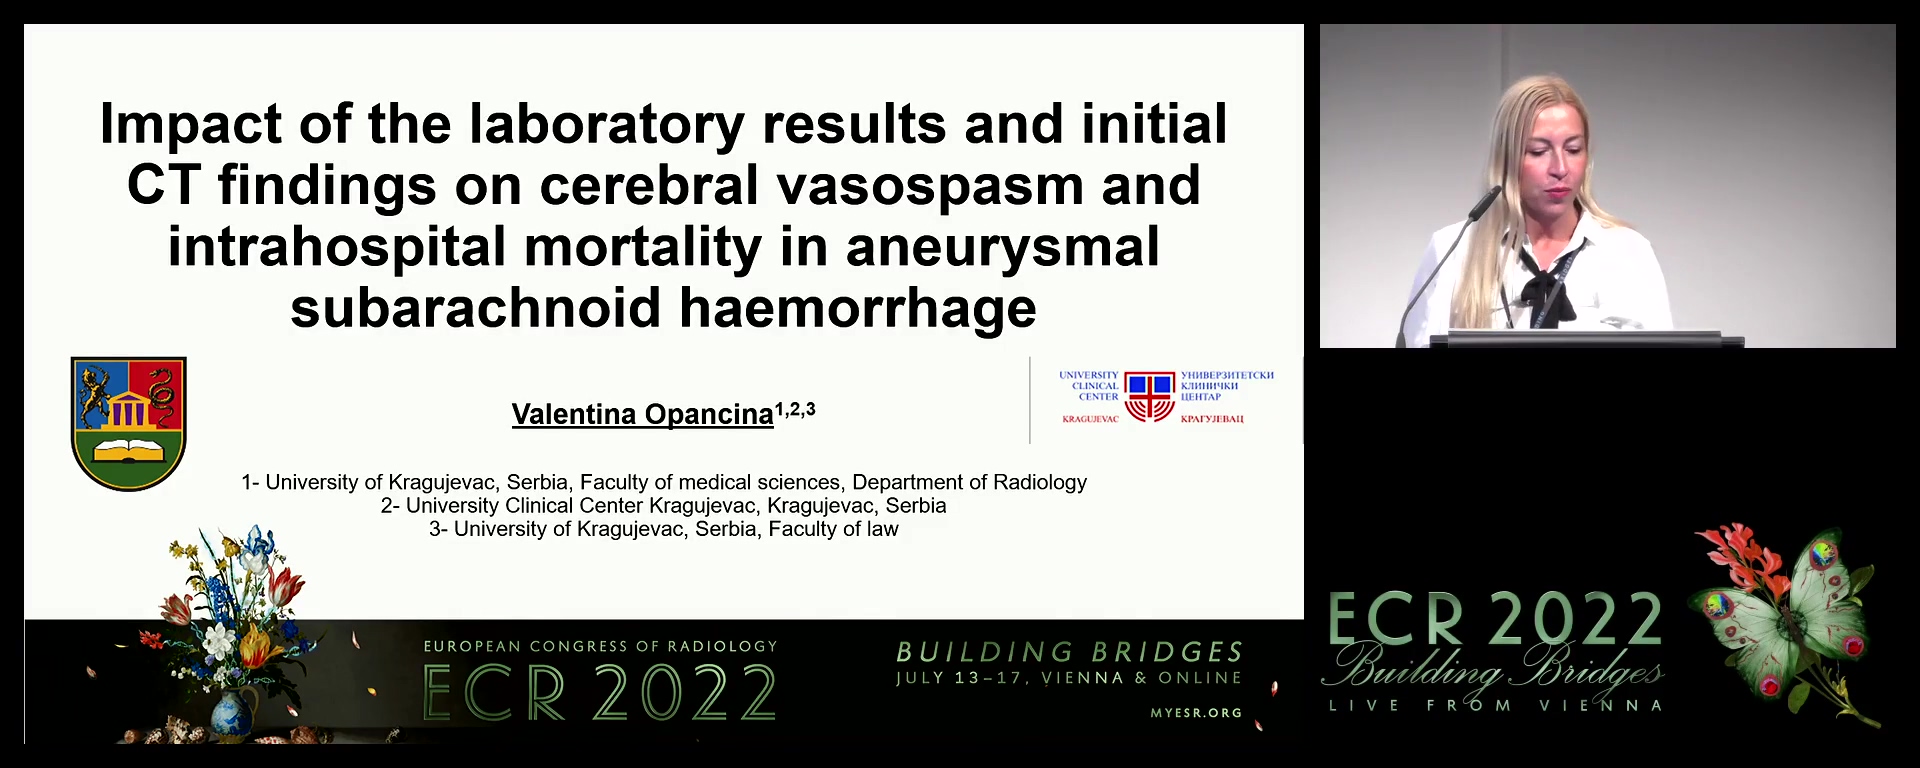 Impact of the laboratory results and initial CT findings on cerebral vasospasm and intrahospital mortality in aneurysmal subarachnoid haemorrhage - Valentina Opancina, Kragujevac / RS